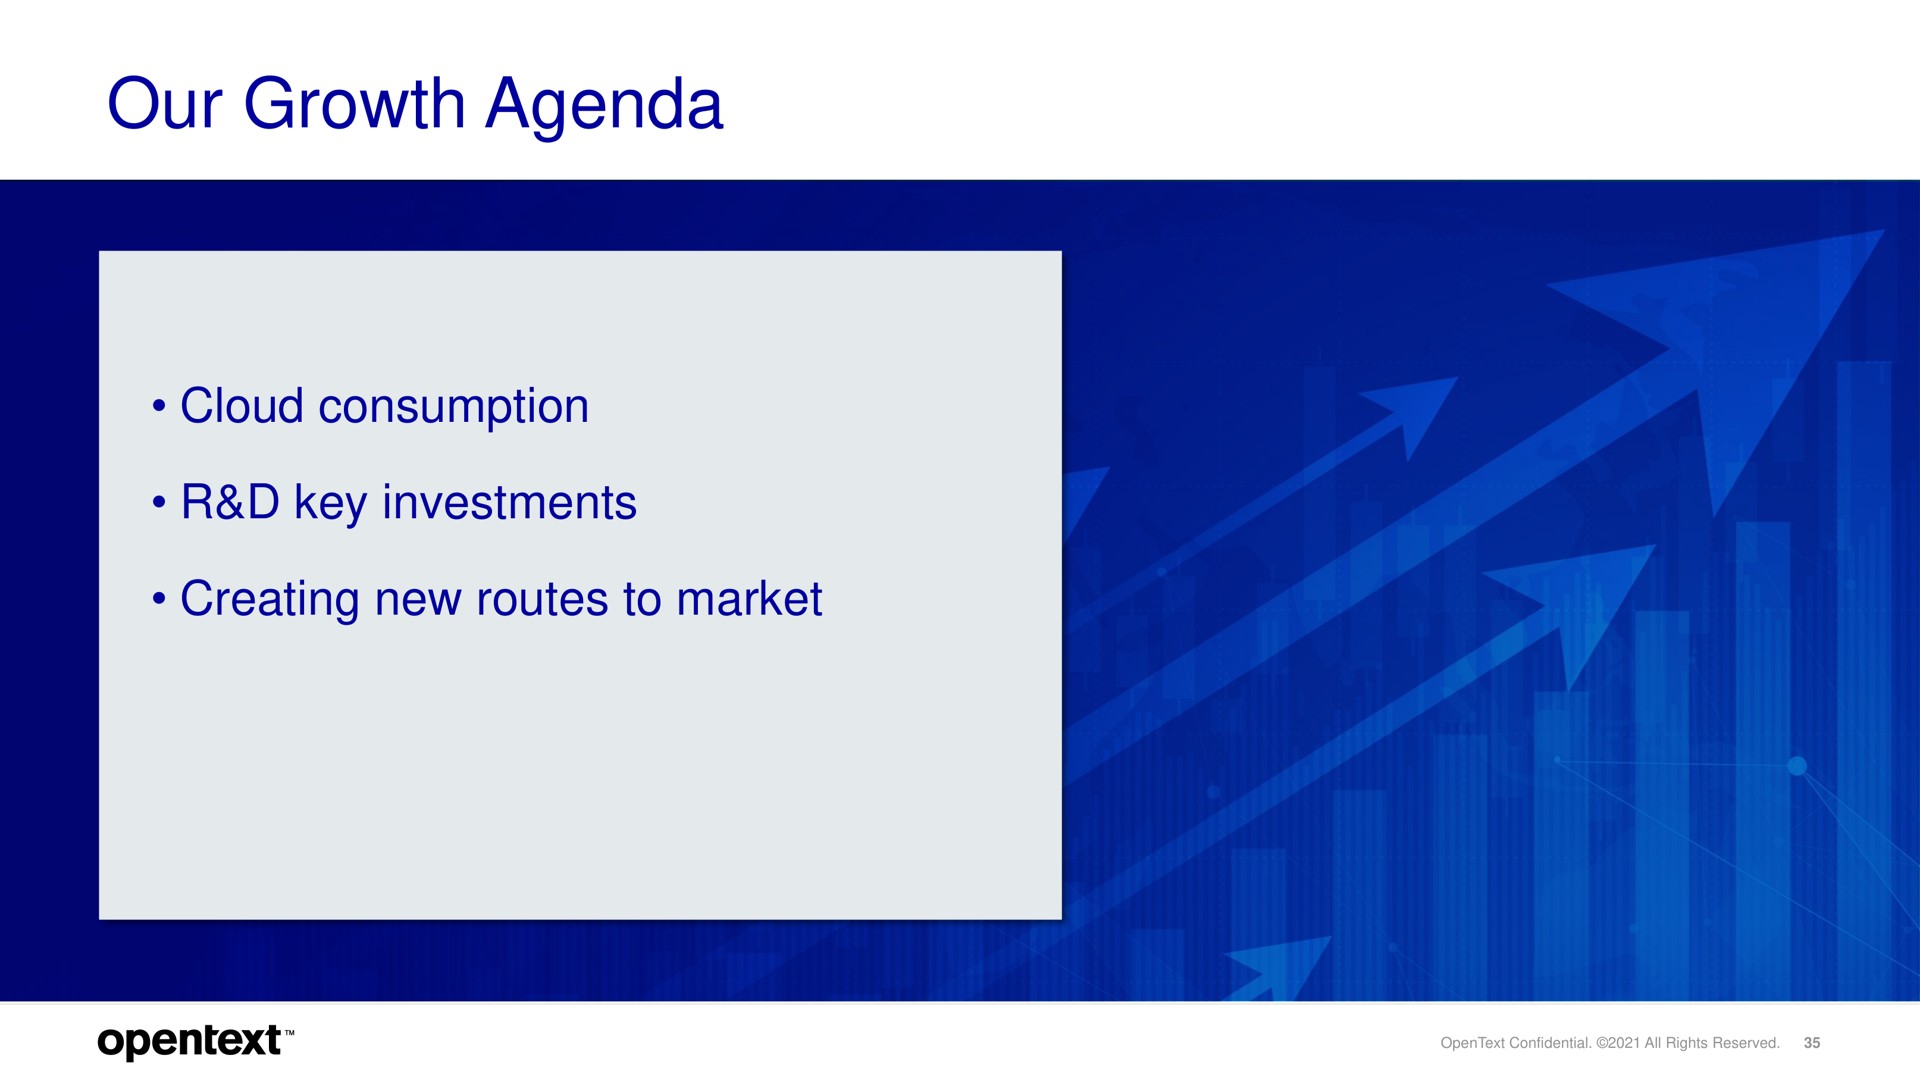 our growth agenda | OpenText